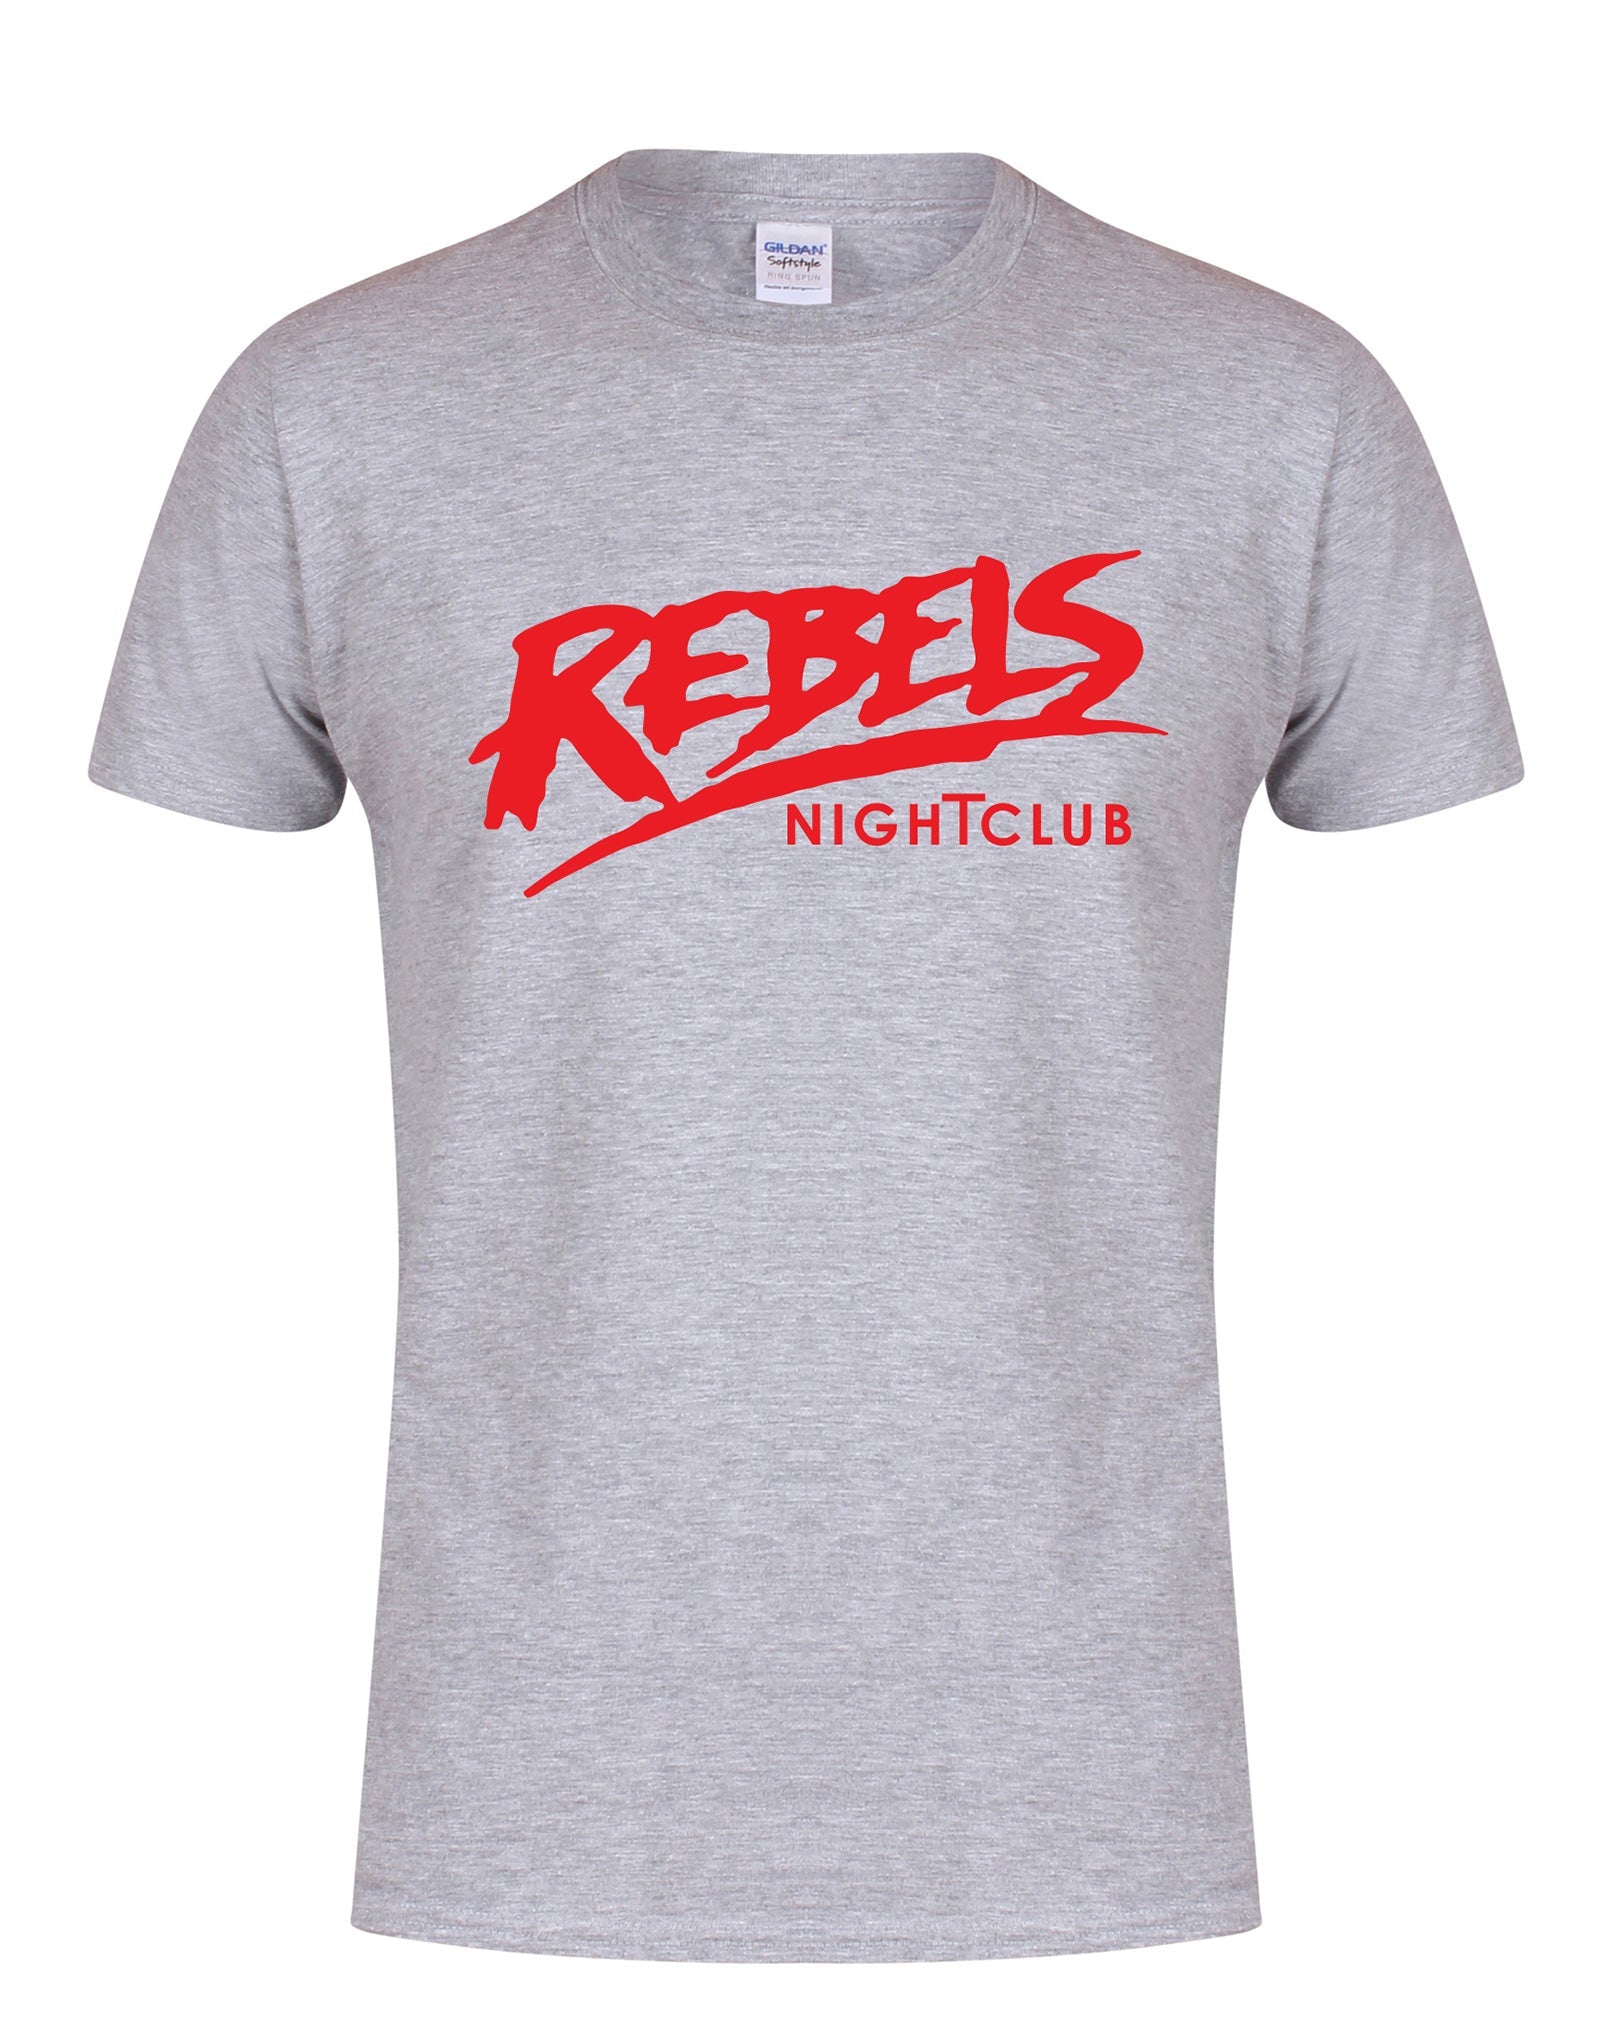 Rebels original sign unisex T-shirt - various colours - Dirty Stop Outs